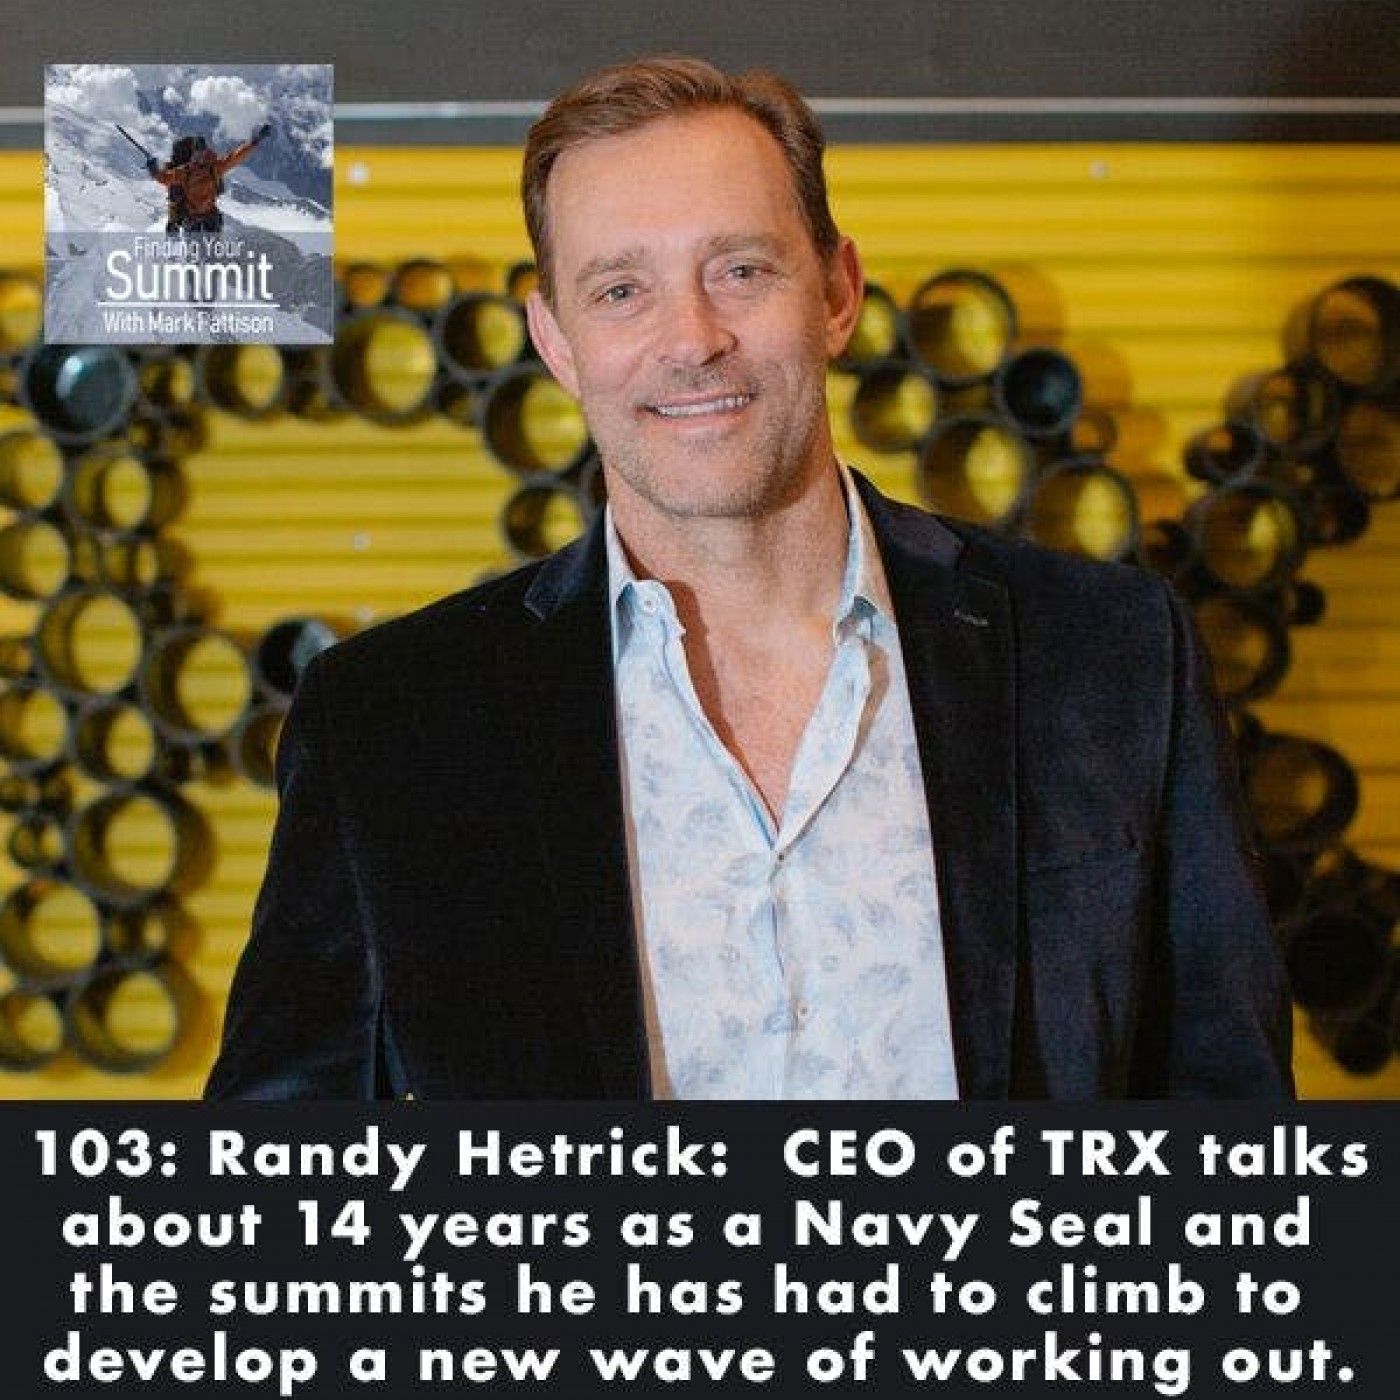 Randy Hetrick:  CEO of TRX talks about 14 years as a Navy Seal and the summits he has had to climb to develop a new wave of working out.